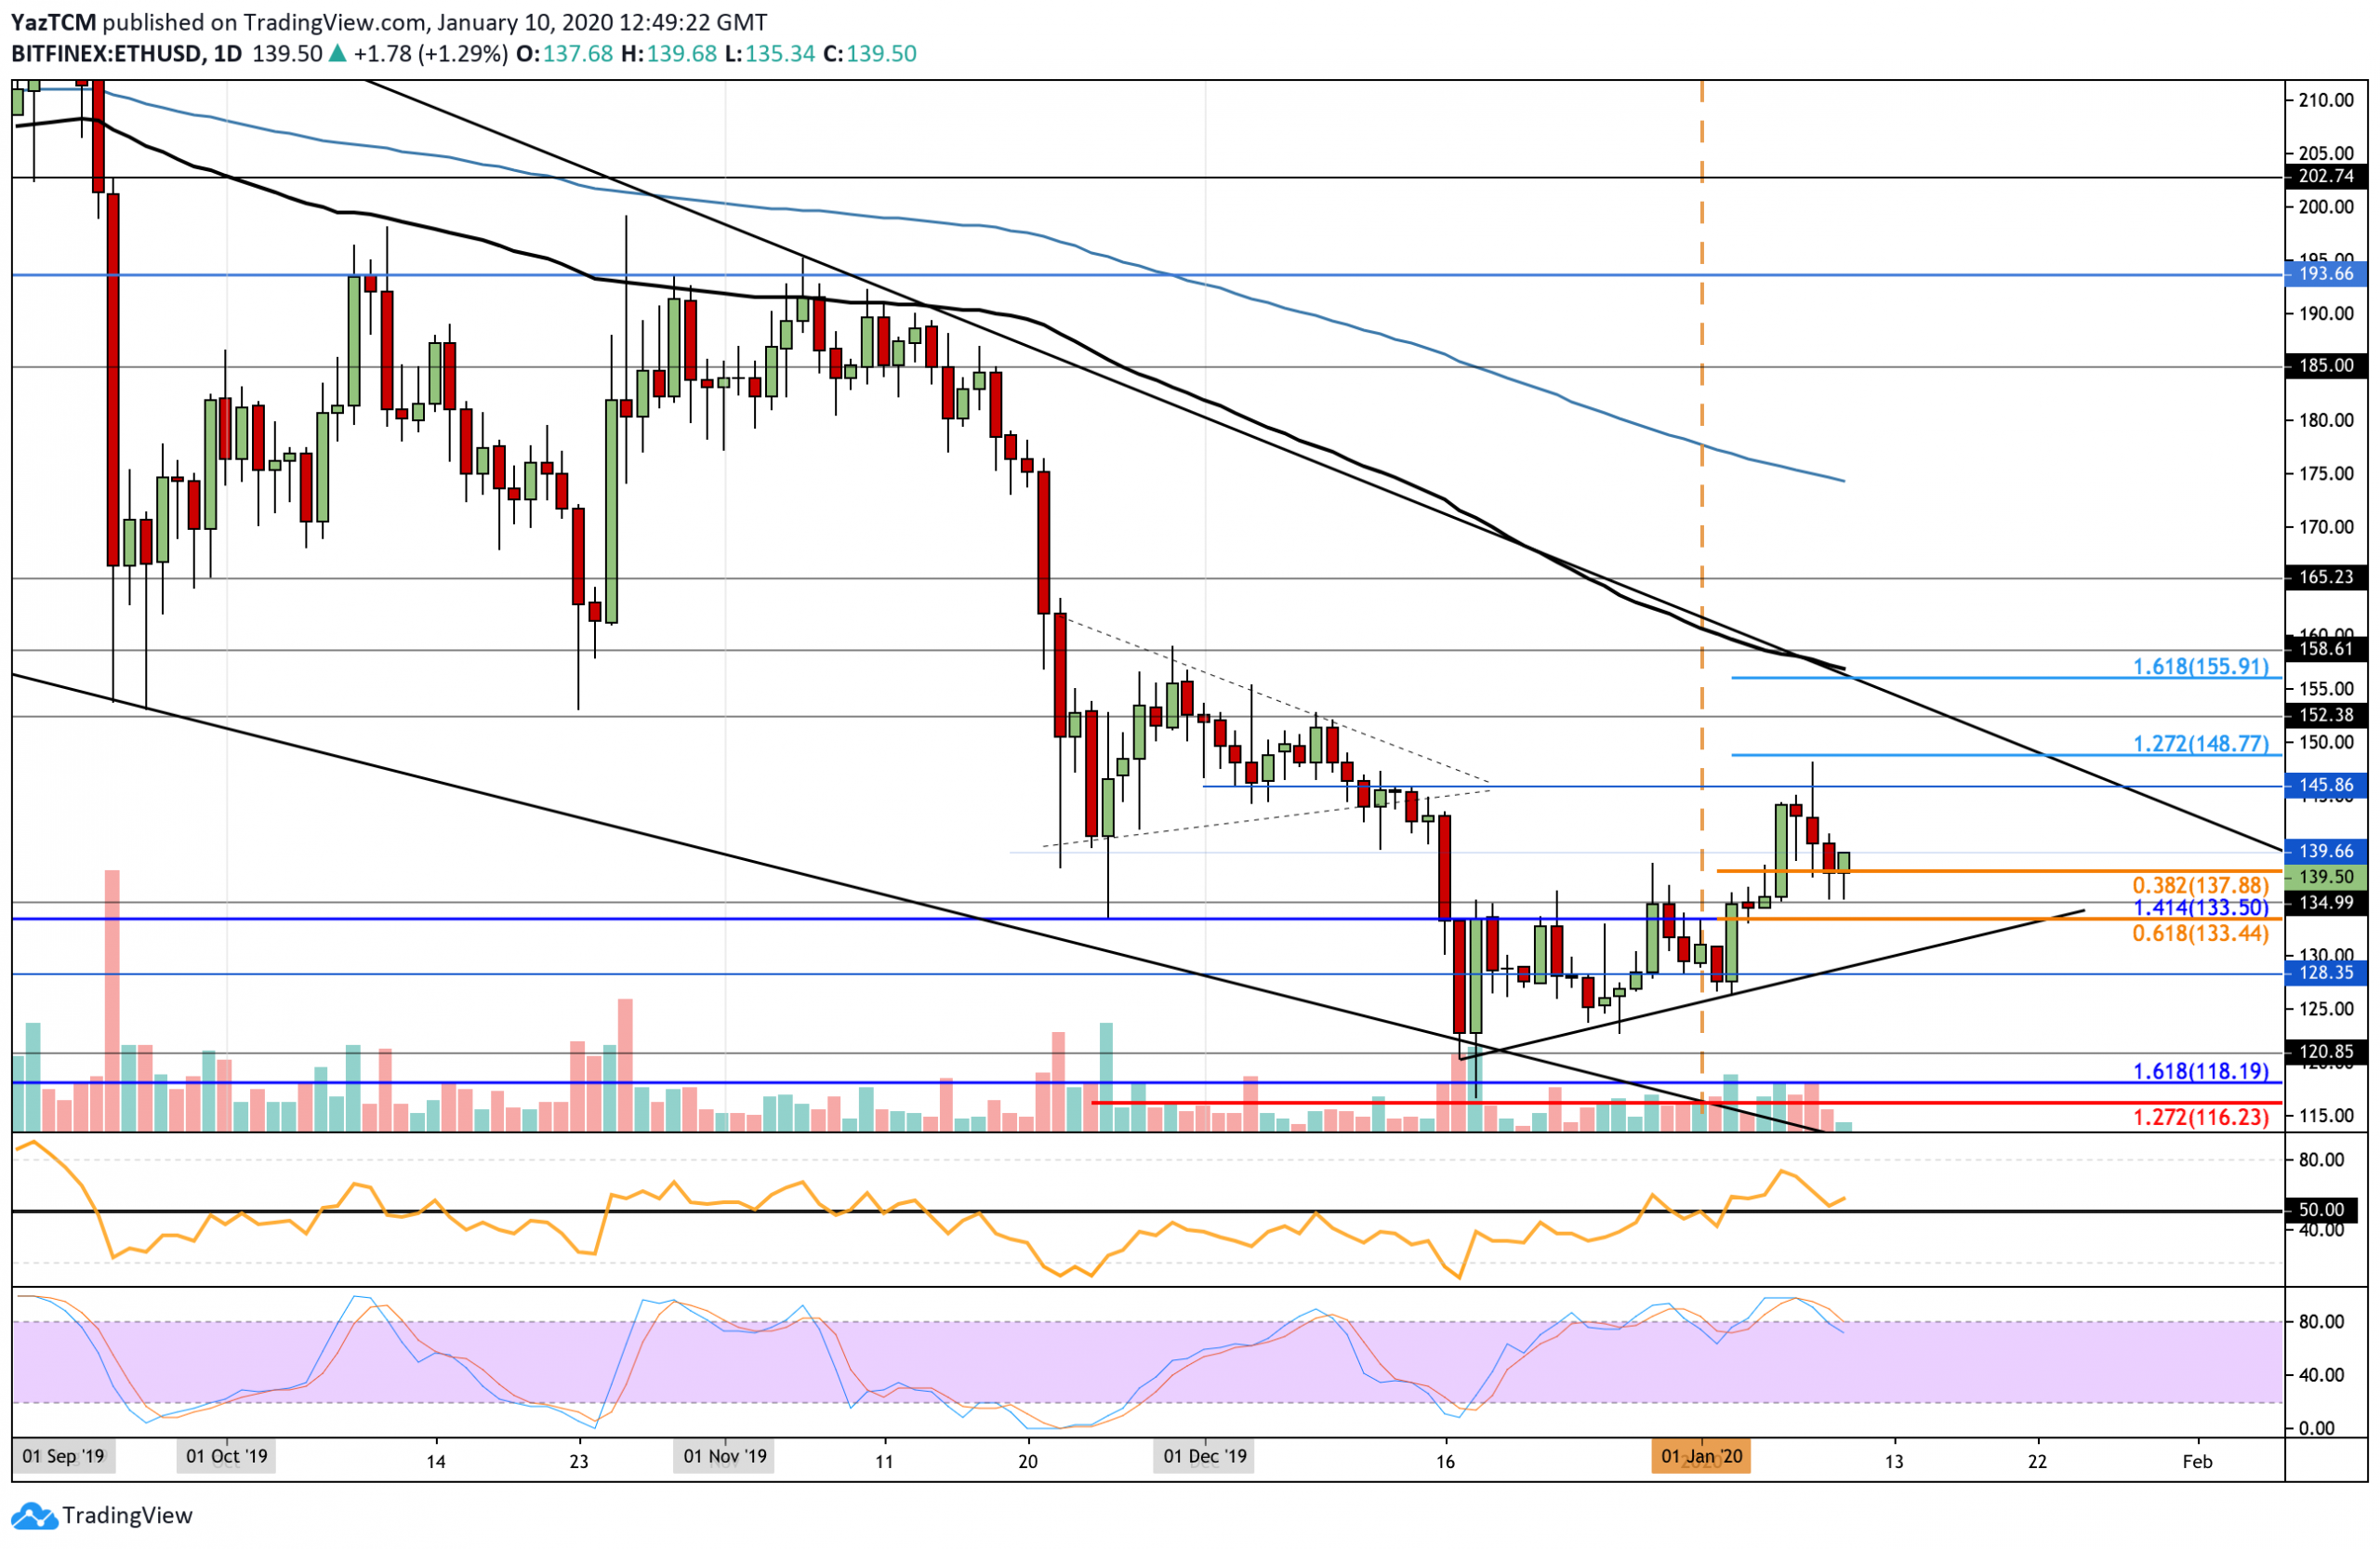 Crypto Price Analysis & Overview January 10th: Bitcoin, Ethereum, Ripple, Tezos, and BSV.